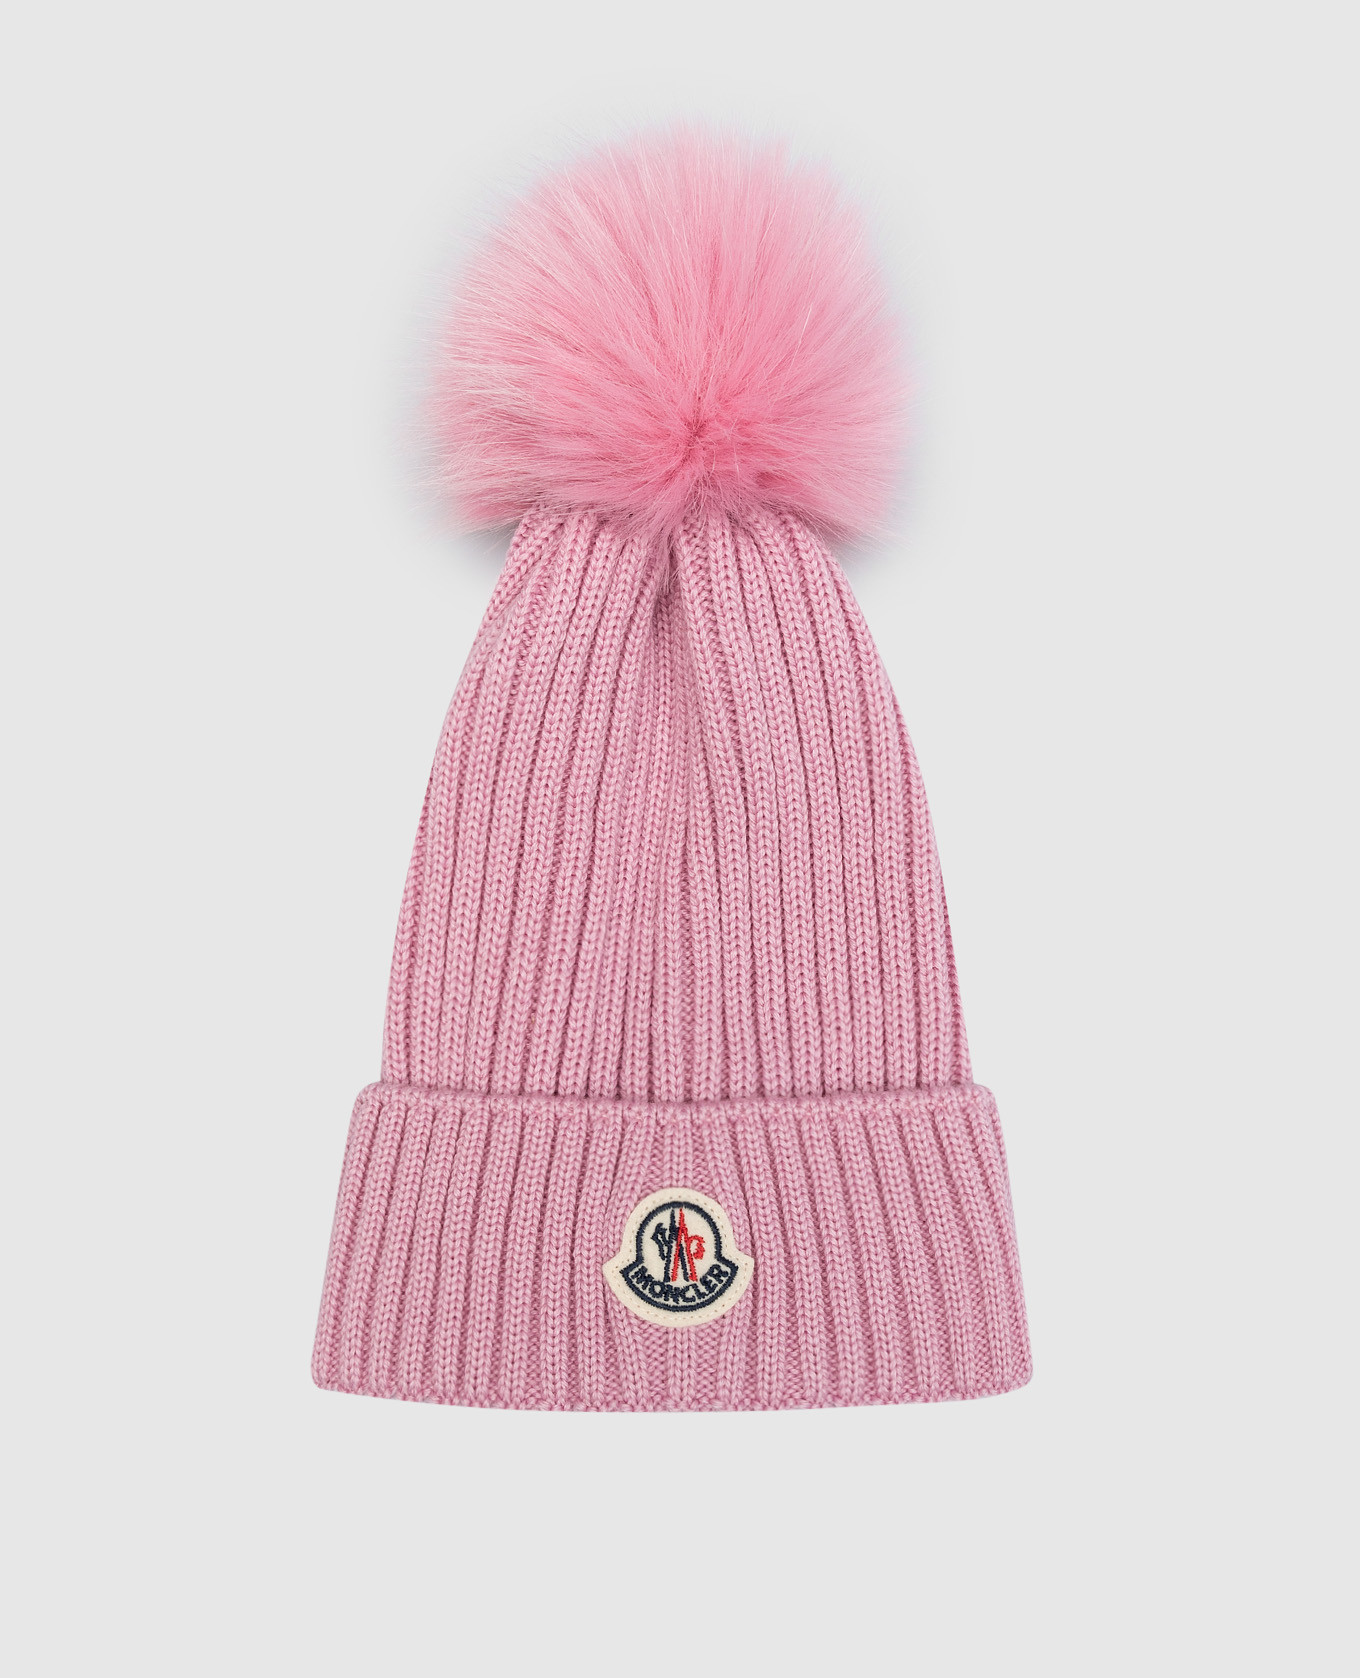 Children's pink hat made of wool